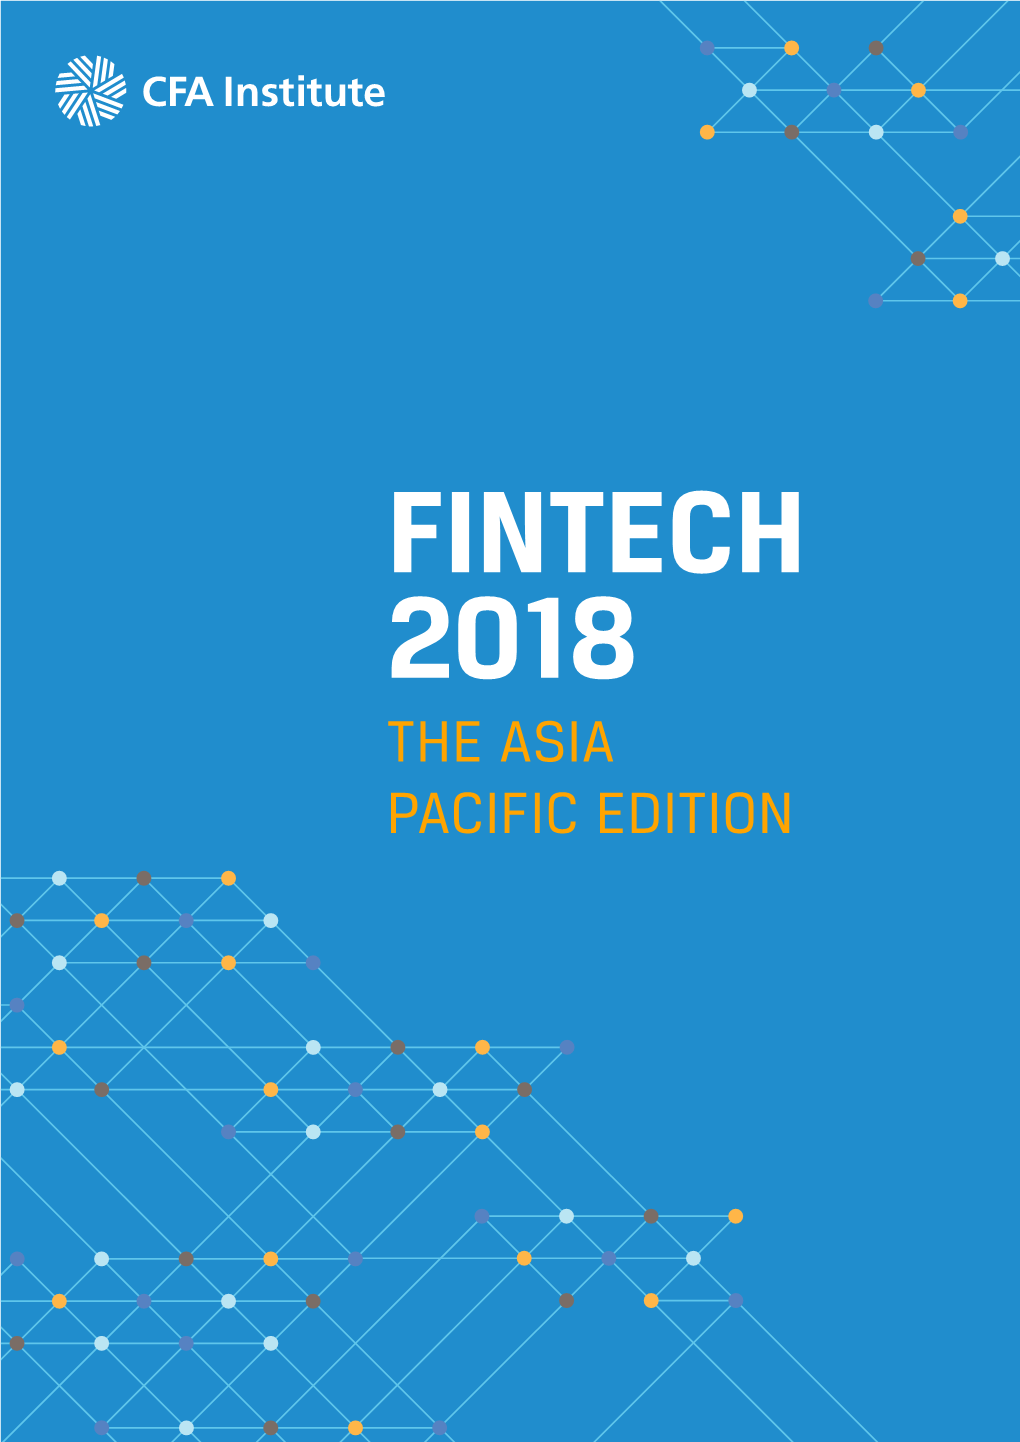 Fintech 2018: the Asia Pacific Edition